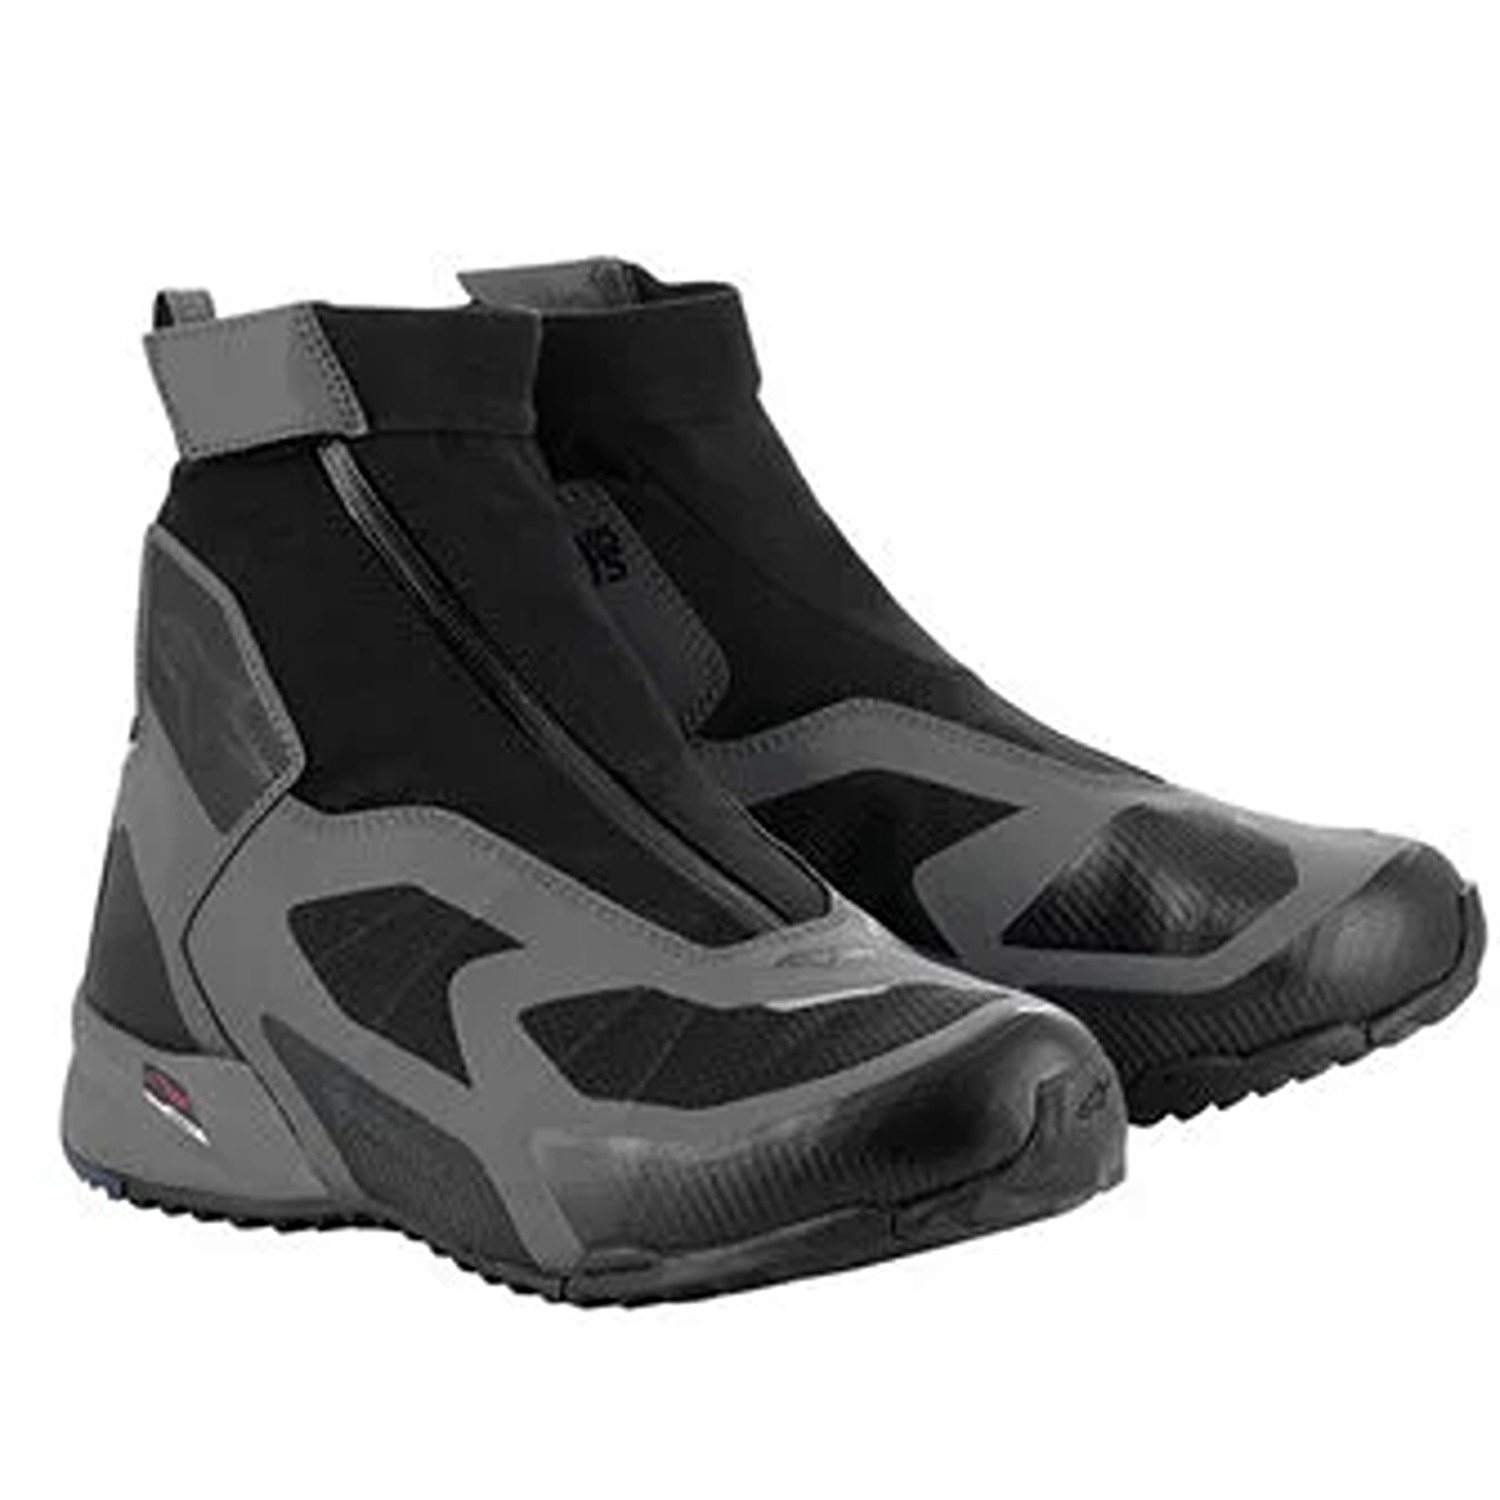 Image of Alpinestars CR-8 Gore-Tex Shoes Black Mid Gray Bright Red Size US 125 ID 8059347260242